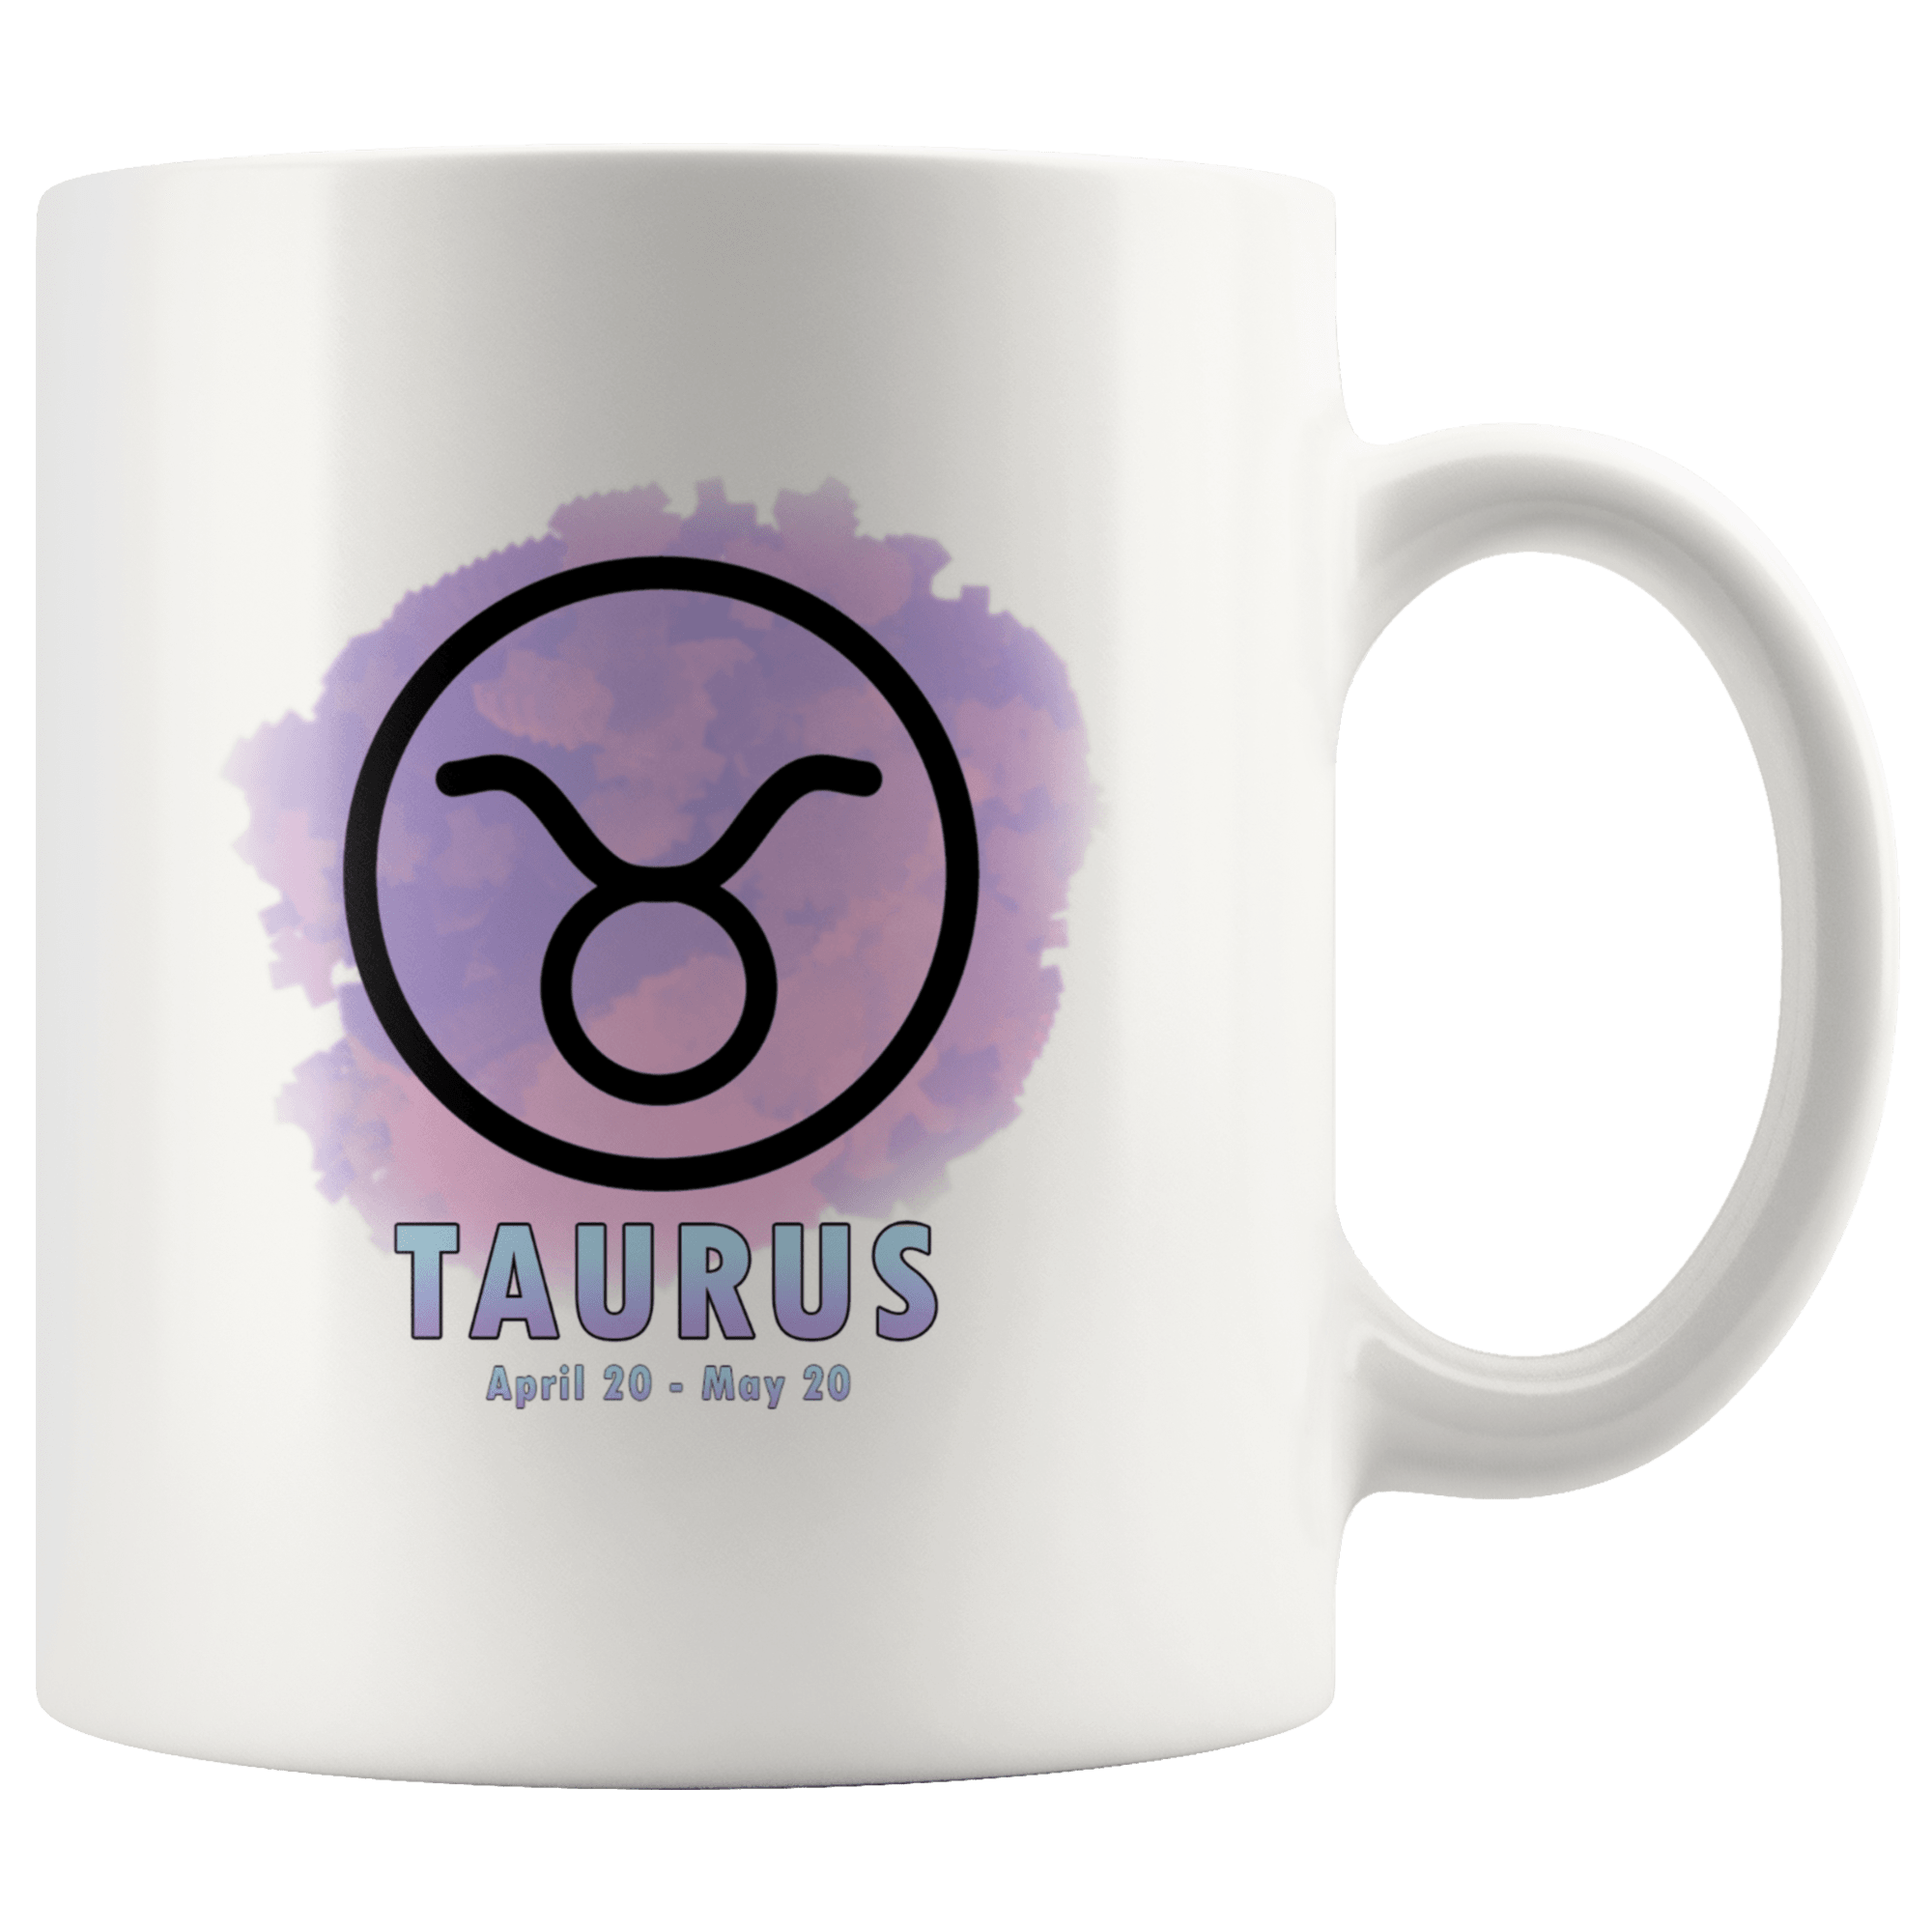 Taurus Coffee Mug - Taurus Constellation Coffee Cup - Zodiac Gifts For Horoscope Lover Born in April or May - SPCM